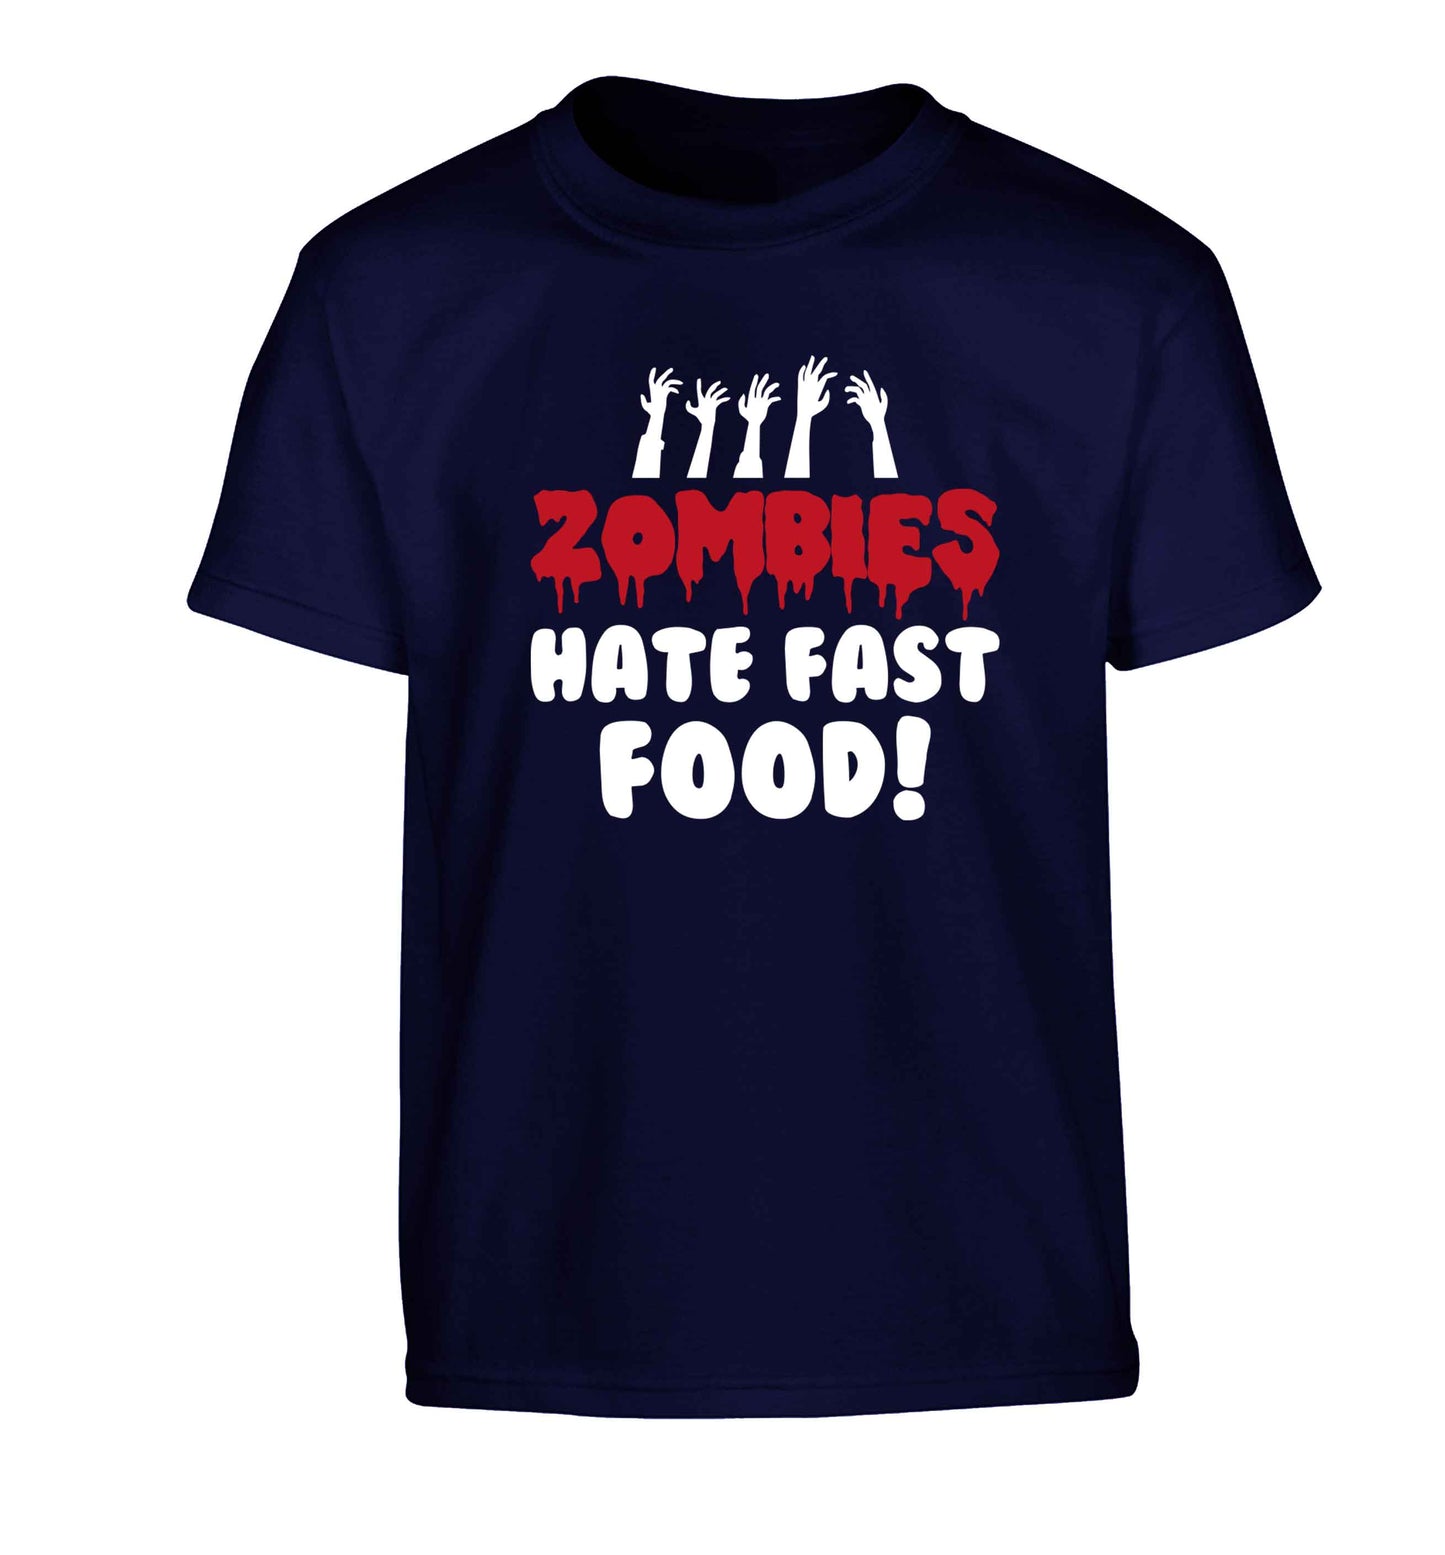 Zombies hate fast food Children's navy Tshirt 12-13 Years